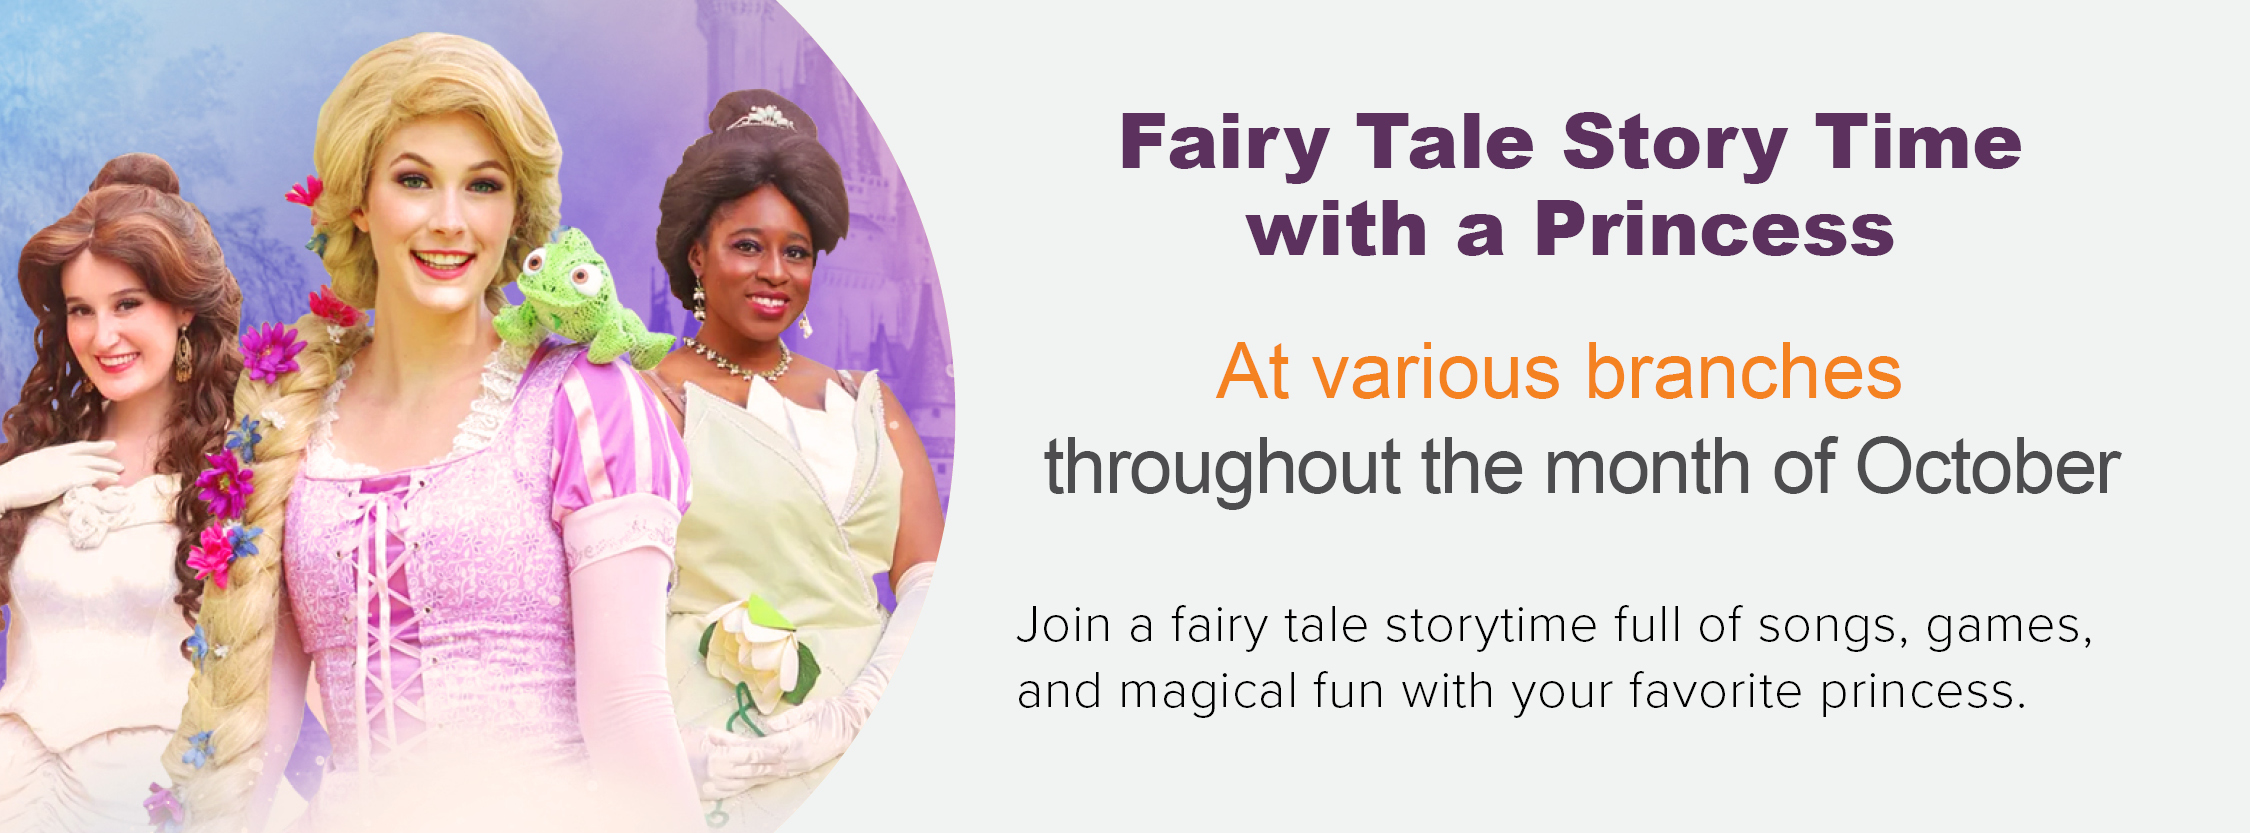 Fairy tale story time with a princess during the month of October